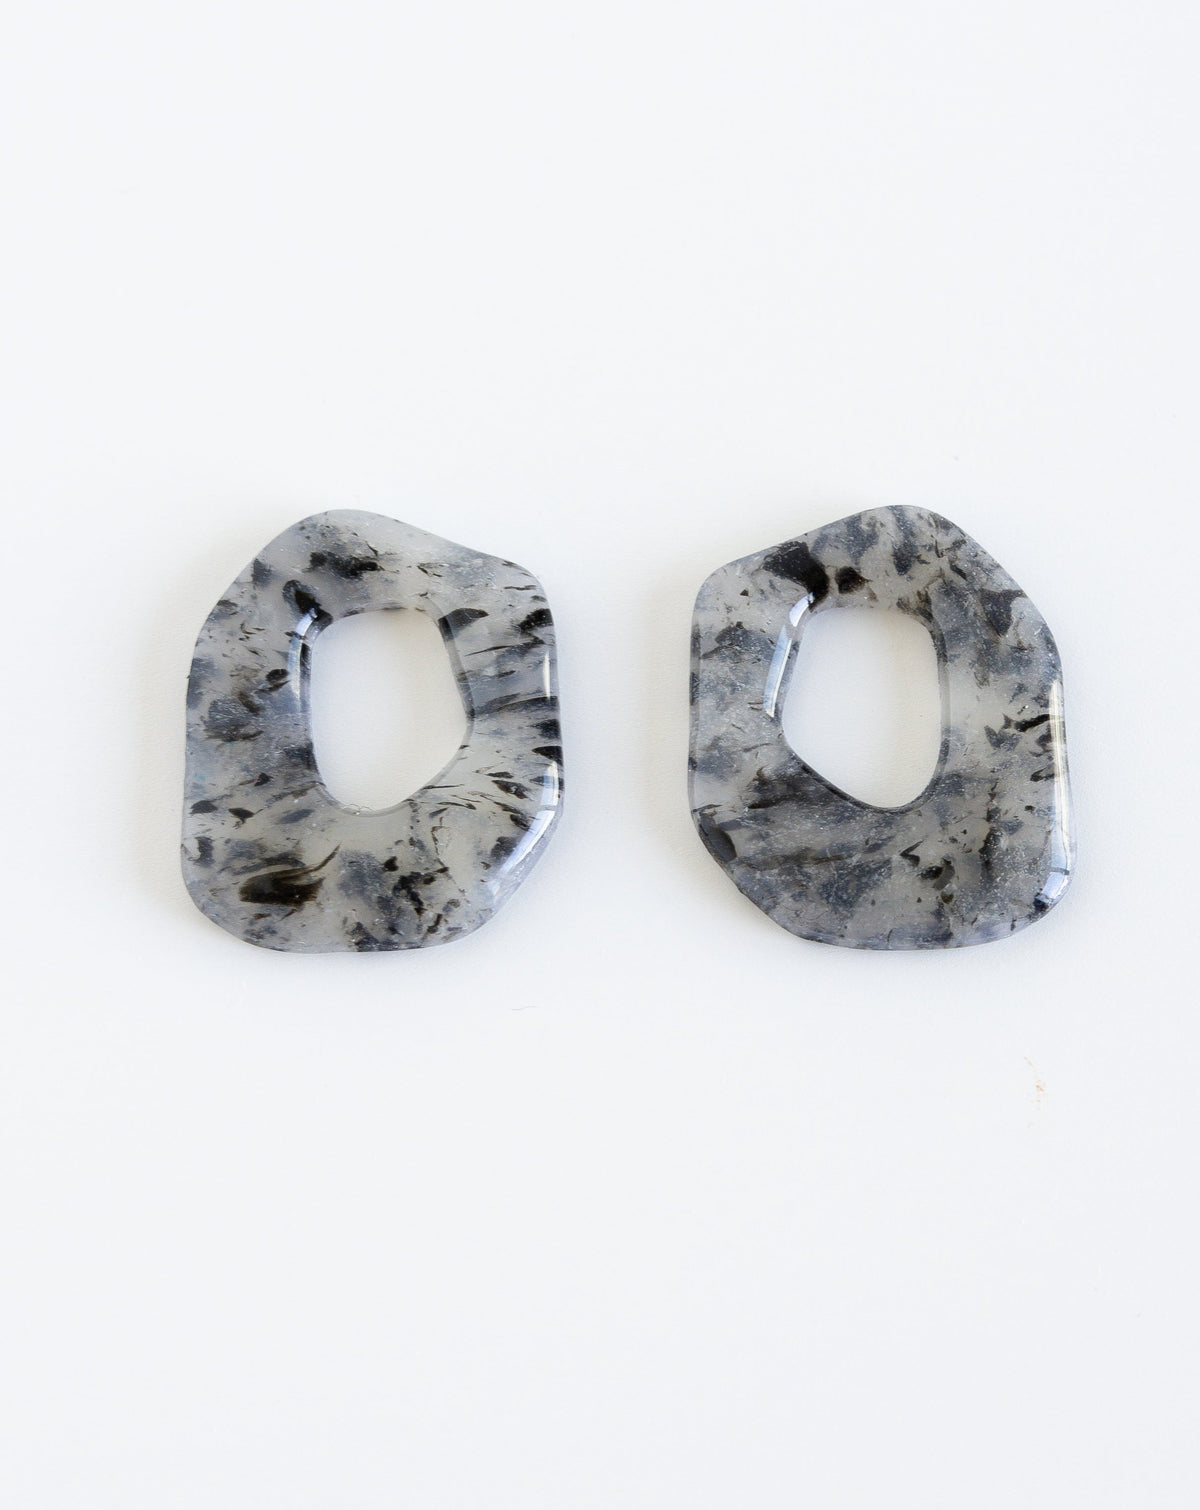 Close up of Darien Beads in Black Marble color